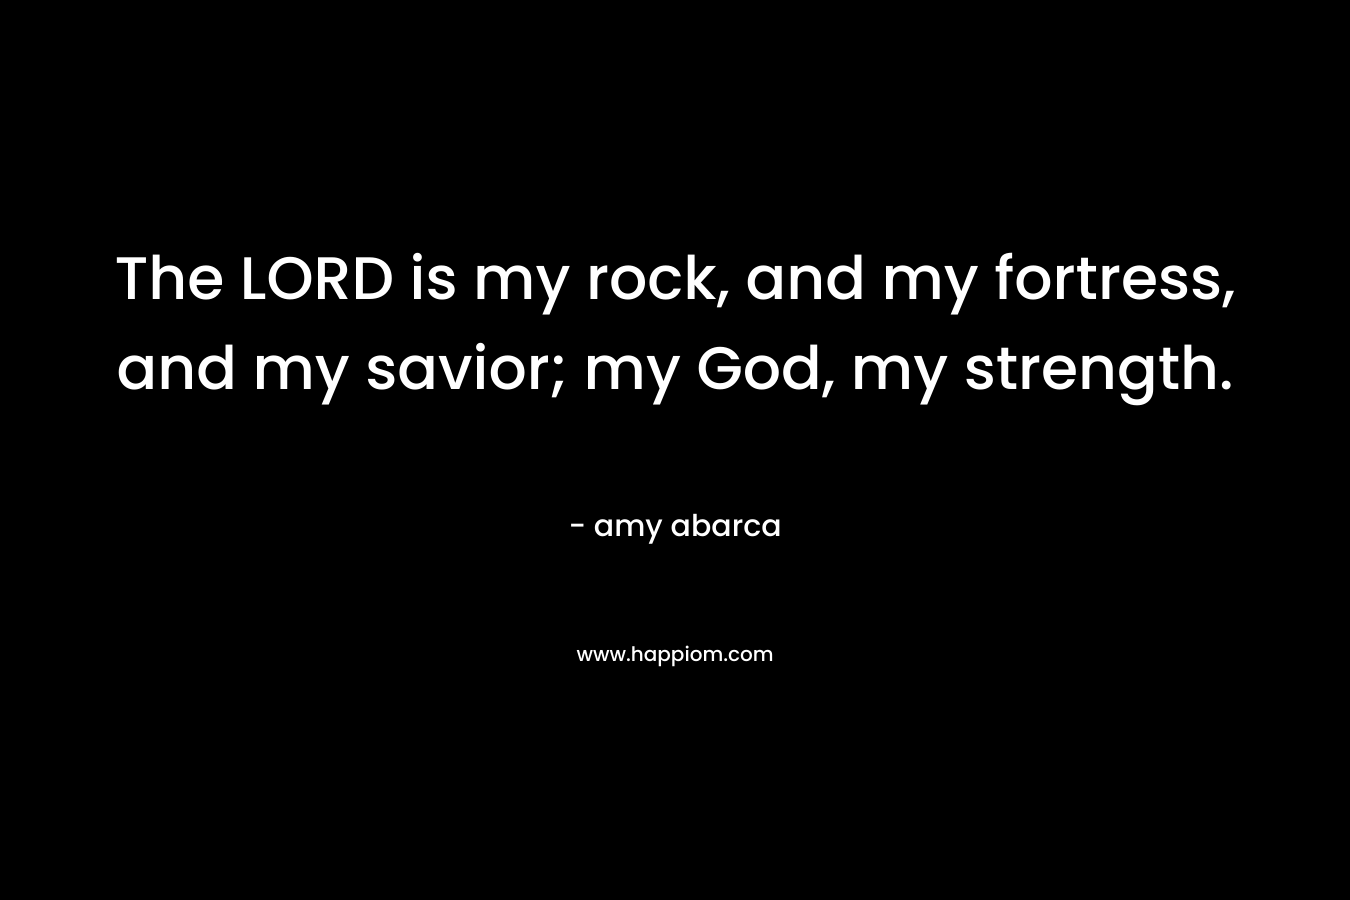 The LORD is my rock, and my fortress, and my savior; my God, my strength.